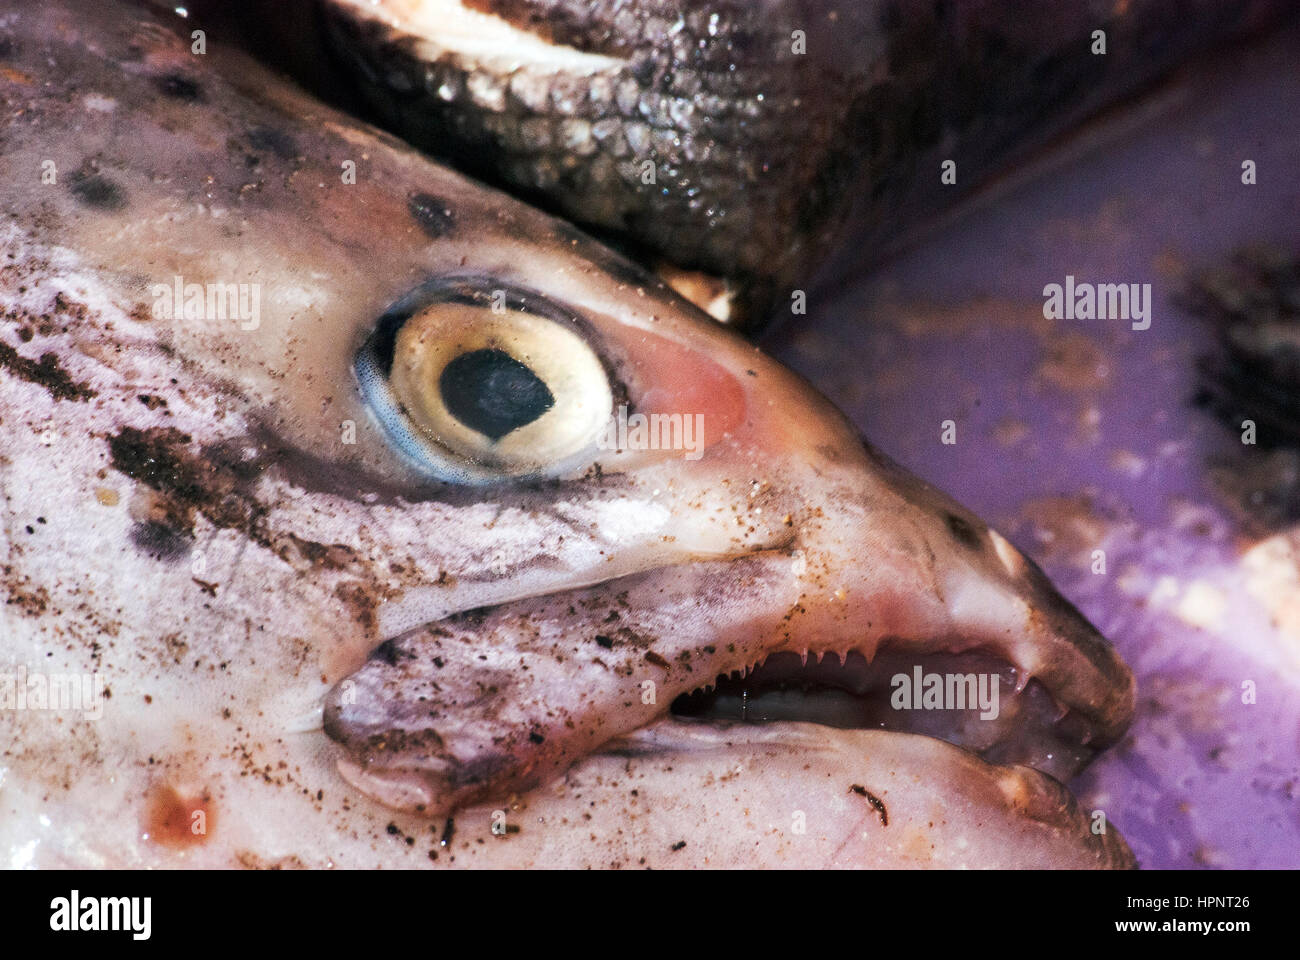 Close up of a fish head being used for bait, South Africa Stock Photo